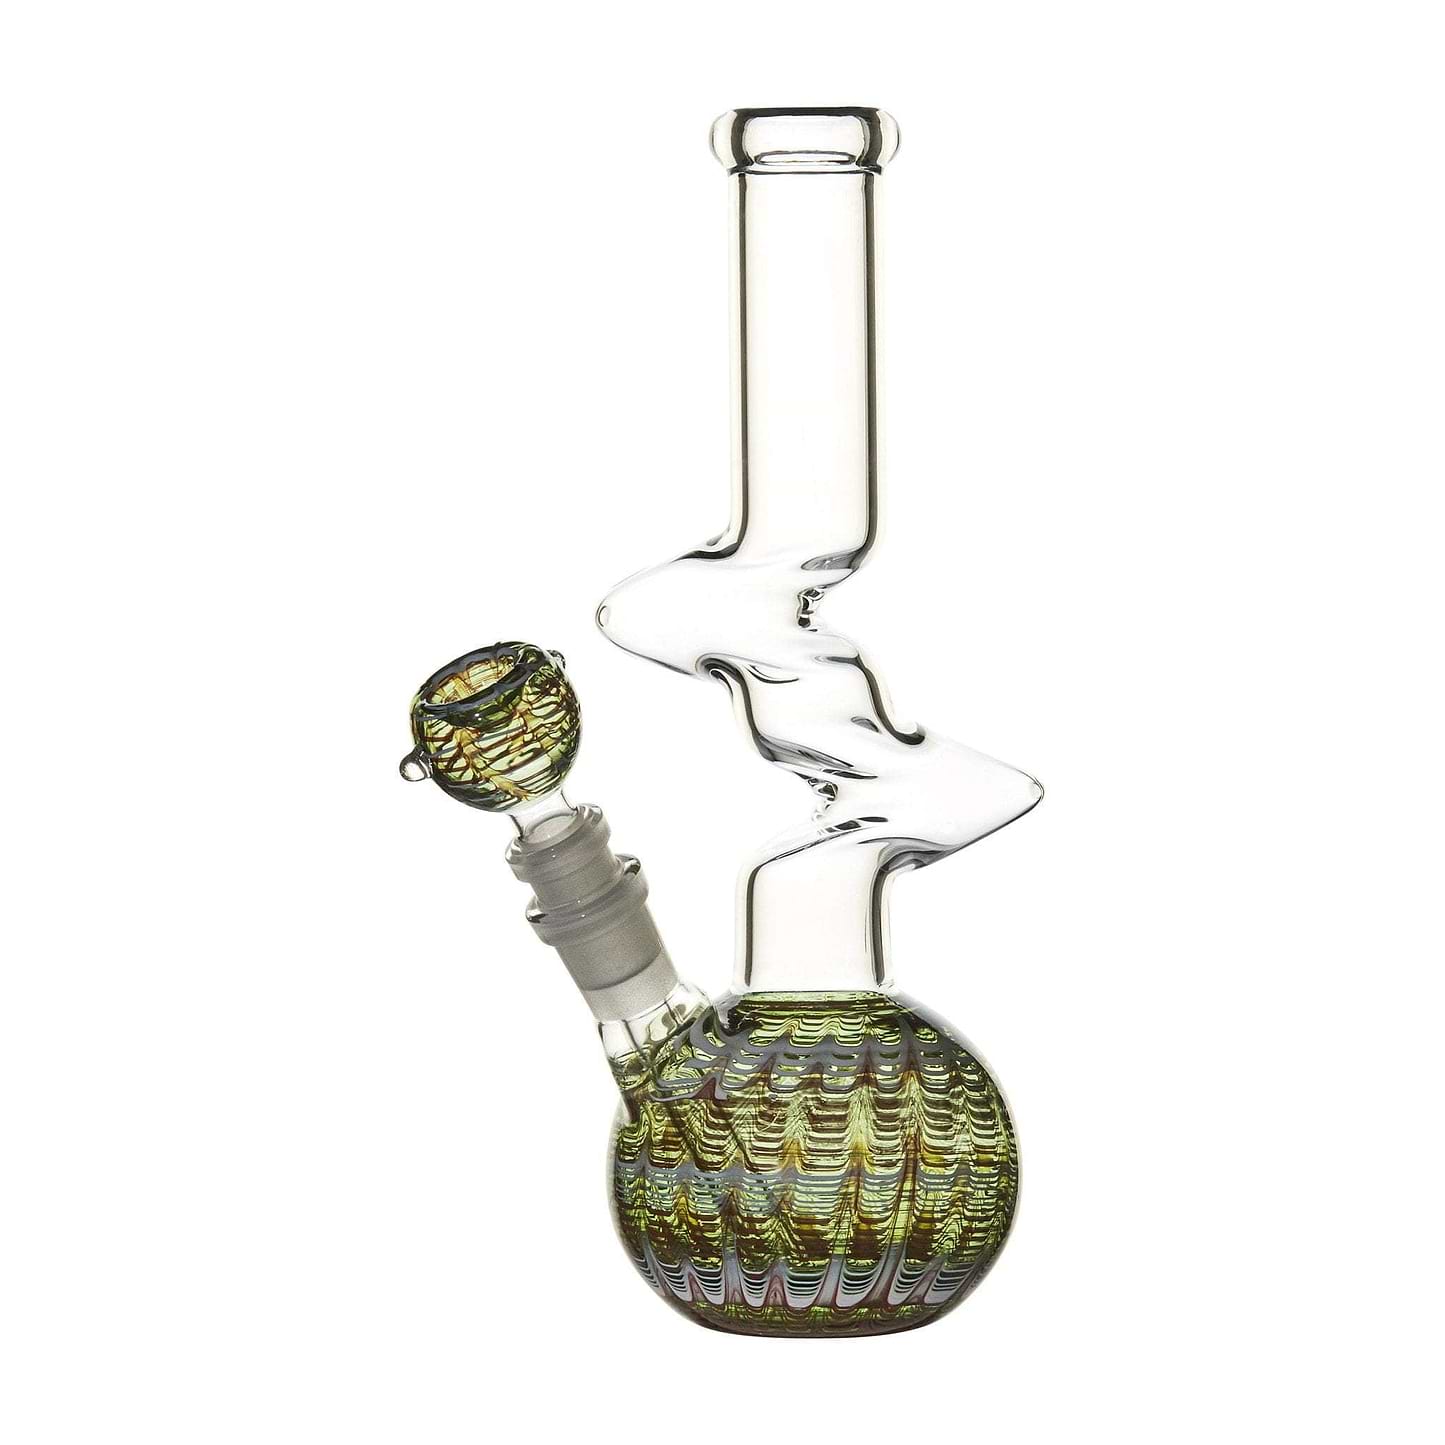 10-inch zong-style glass bong smoking device with kinky shape psychedelic design protruding Z shape